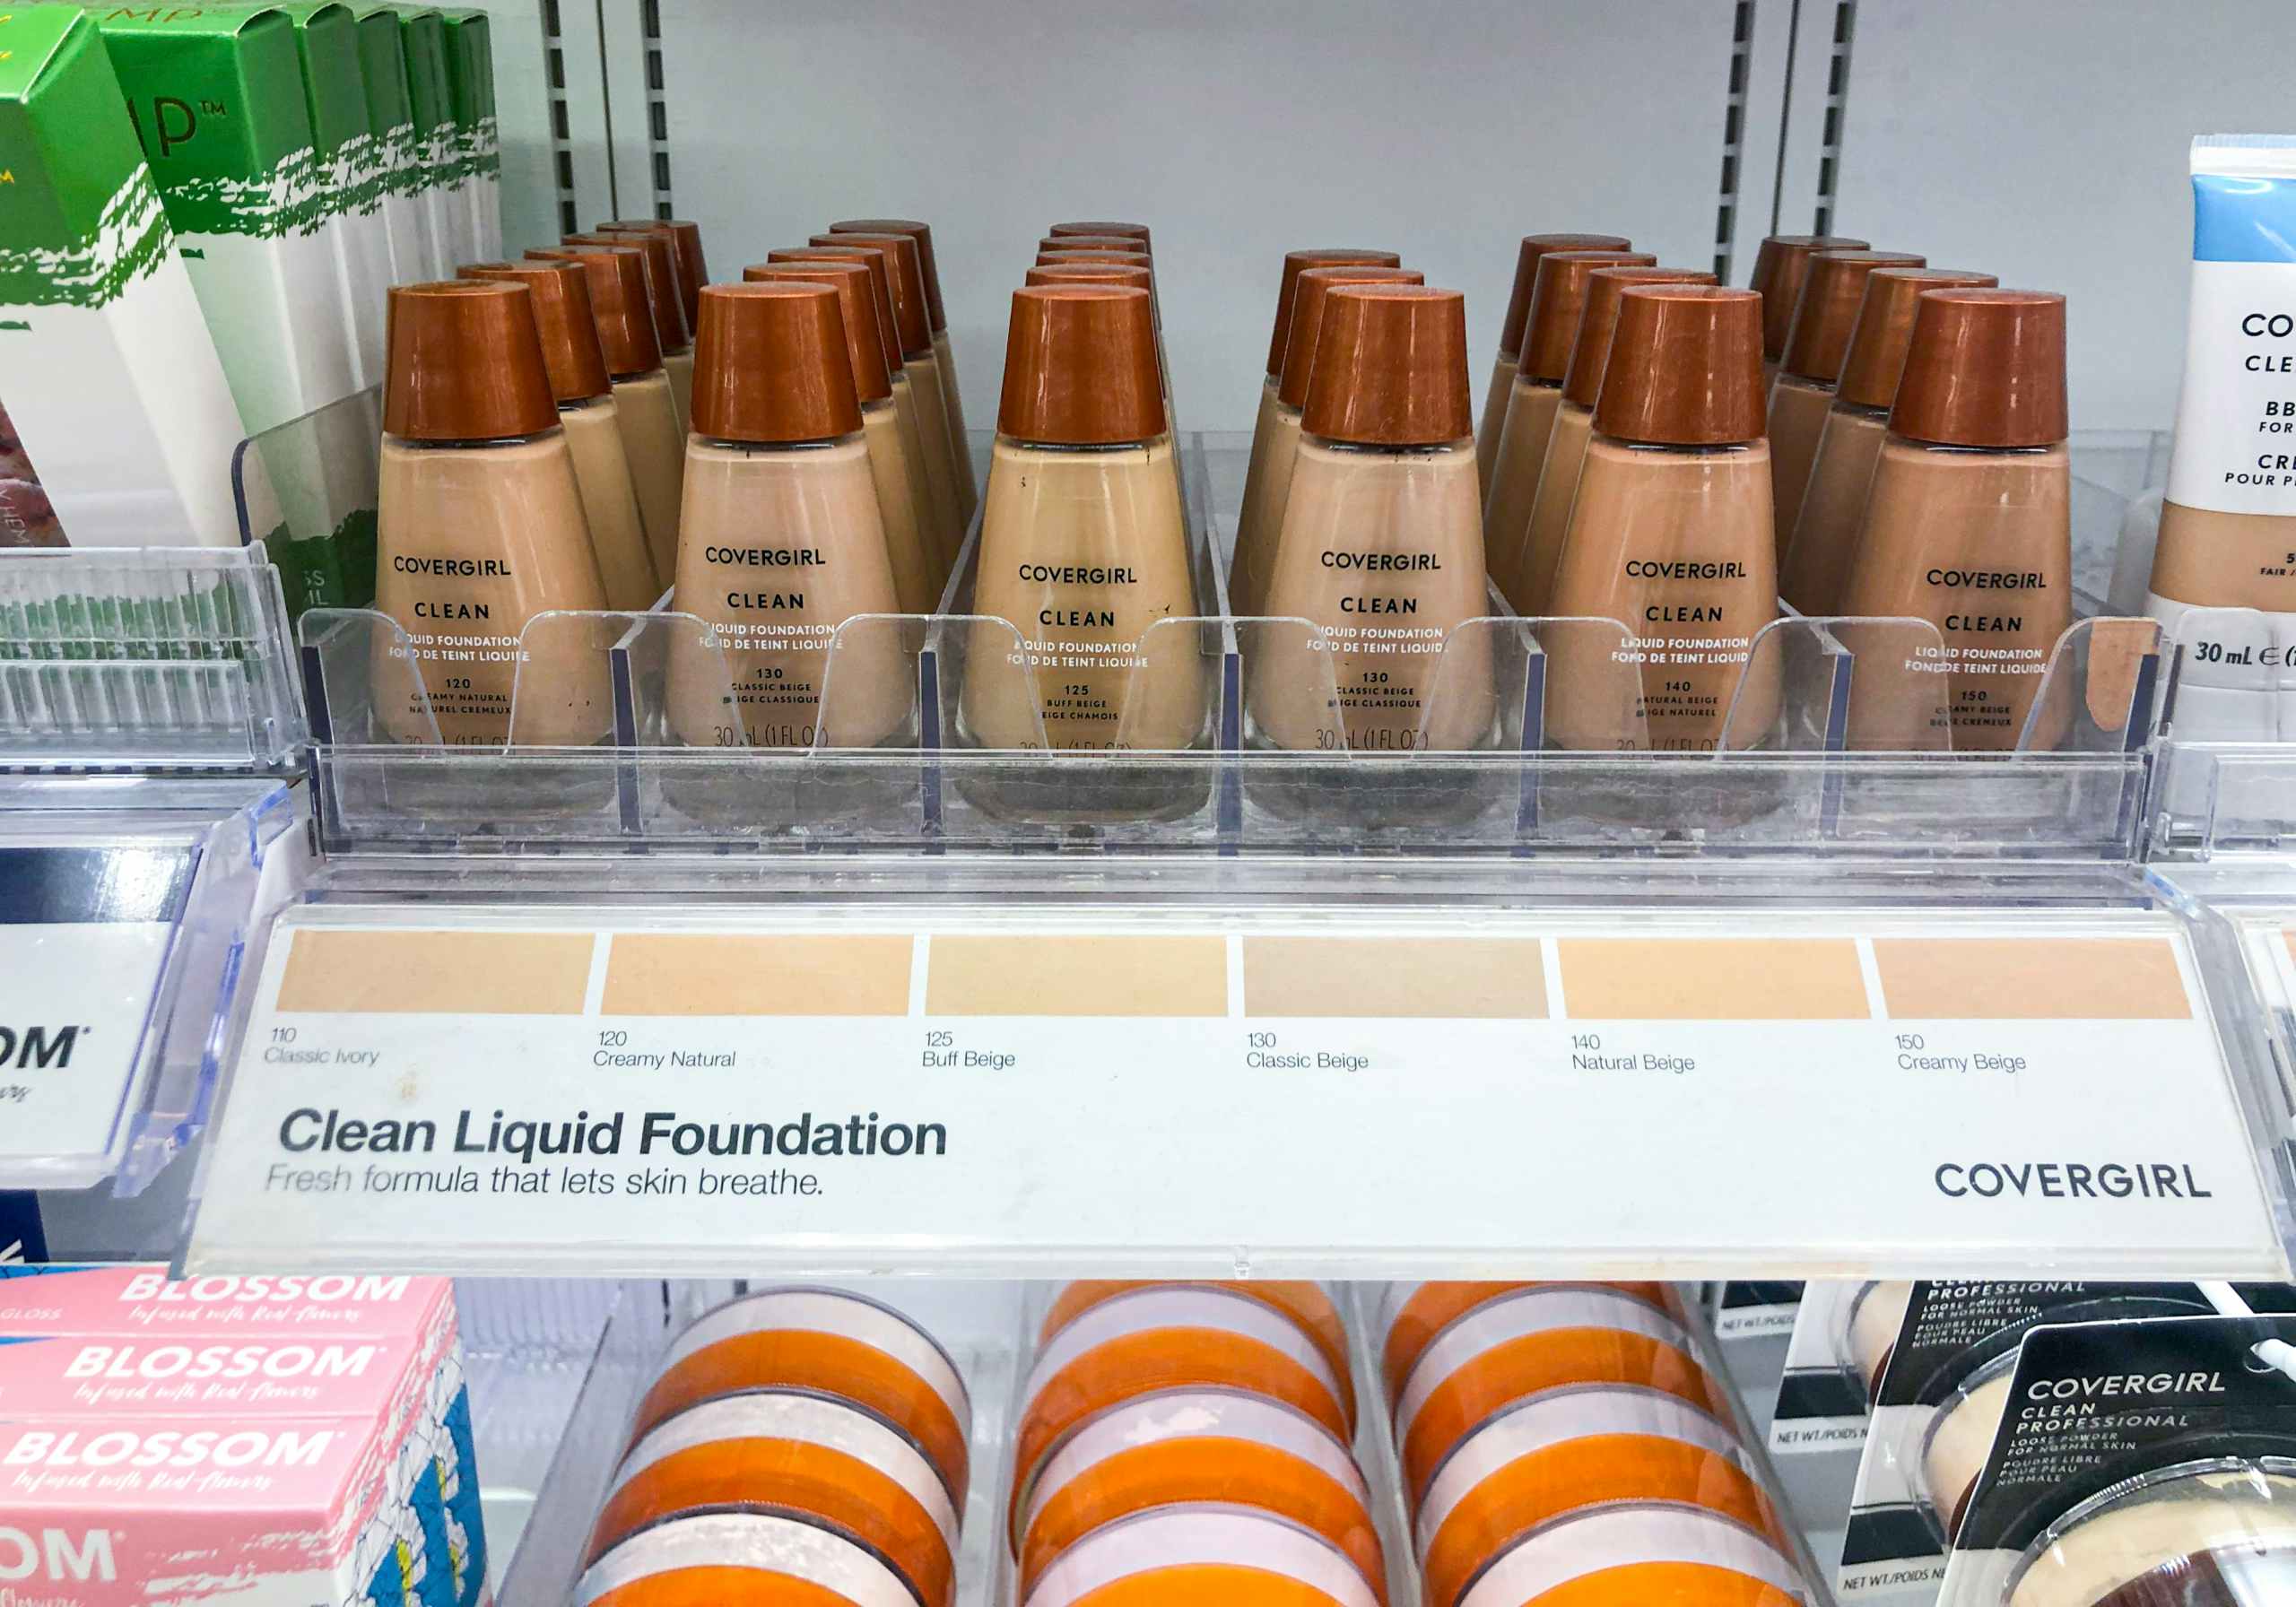 bottles of Covergirl liquid foundation on the shelf of a makeup aisle at Target